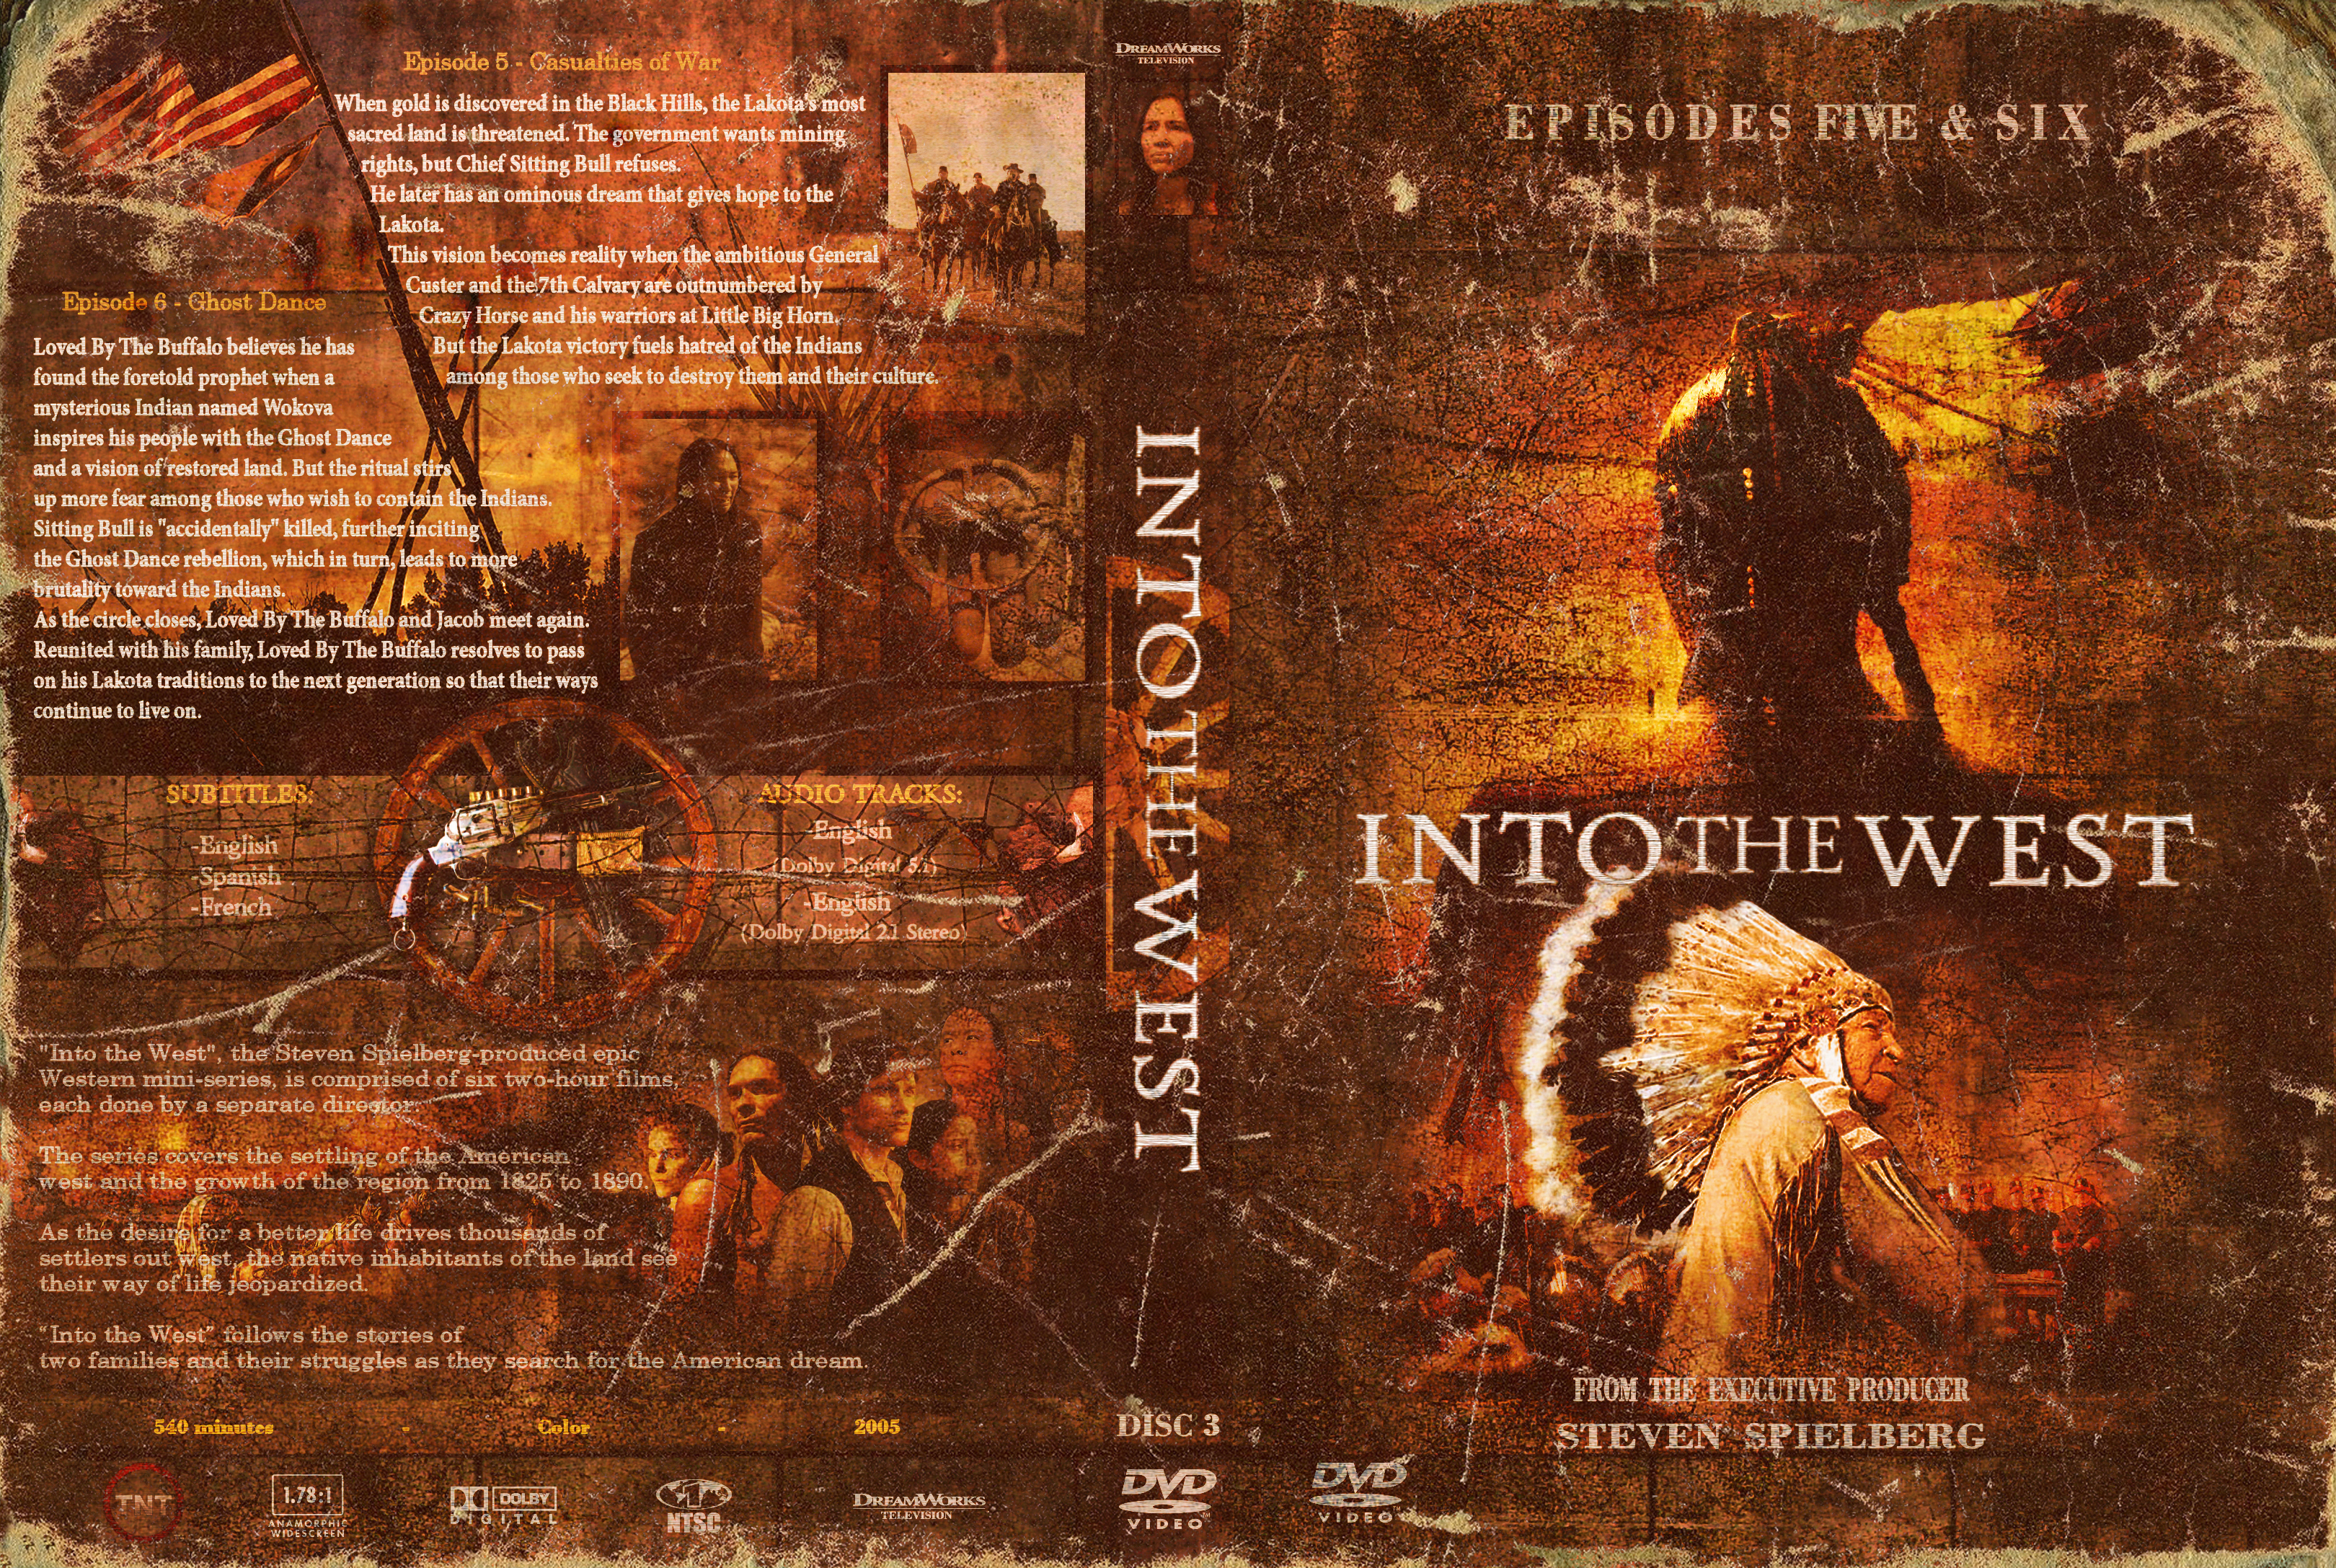 Into the west - dvd 3